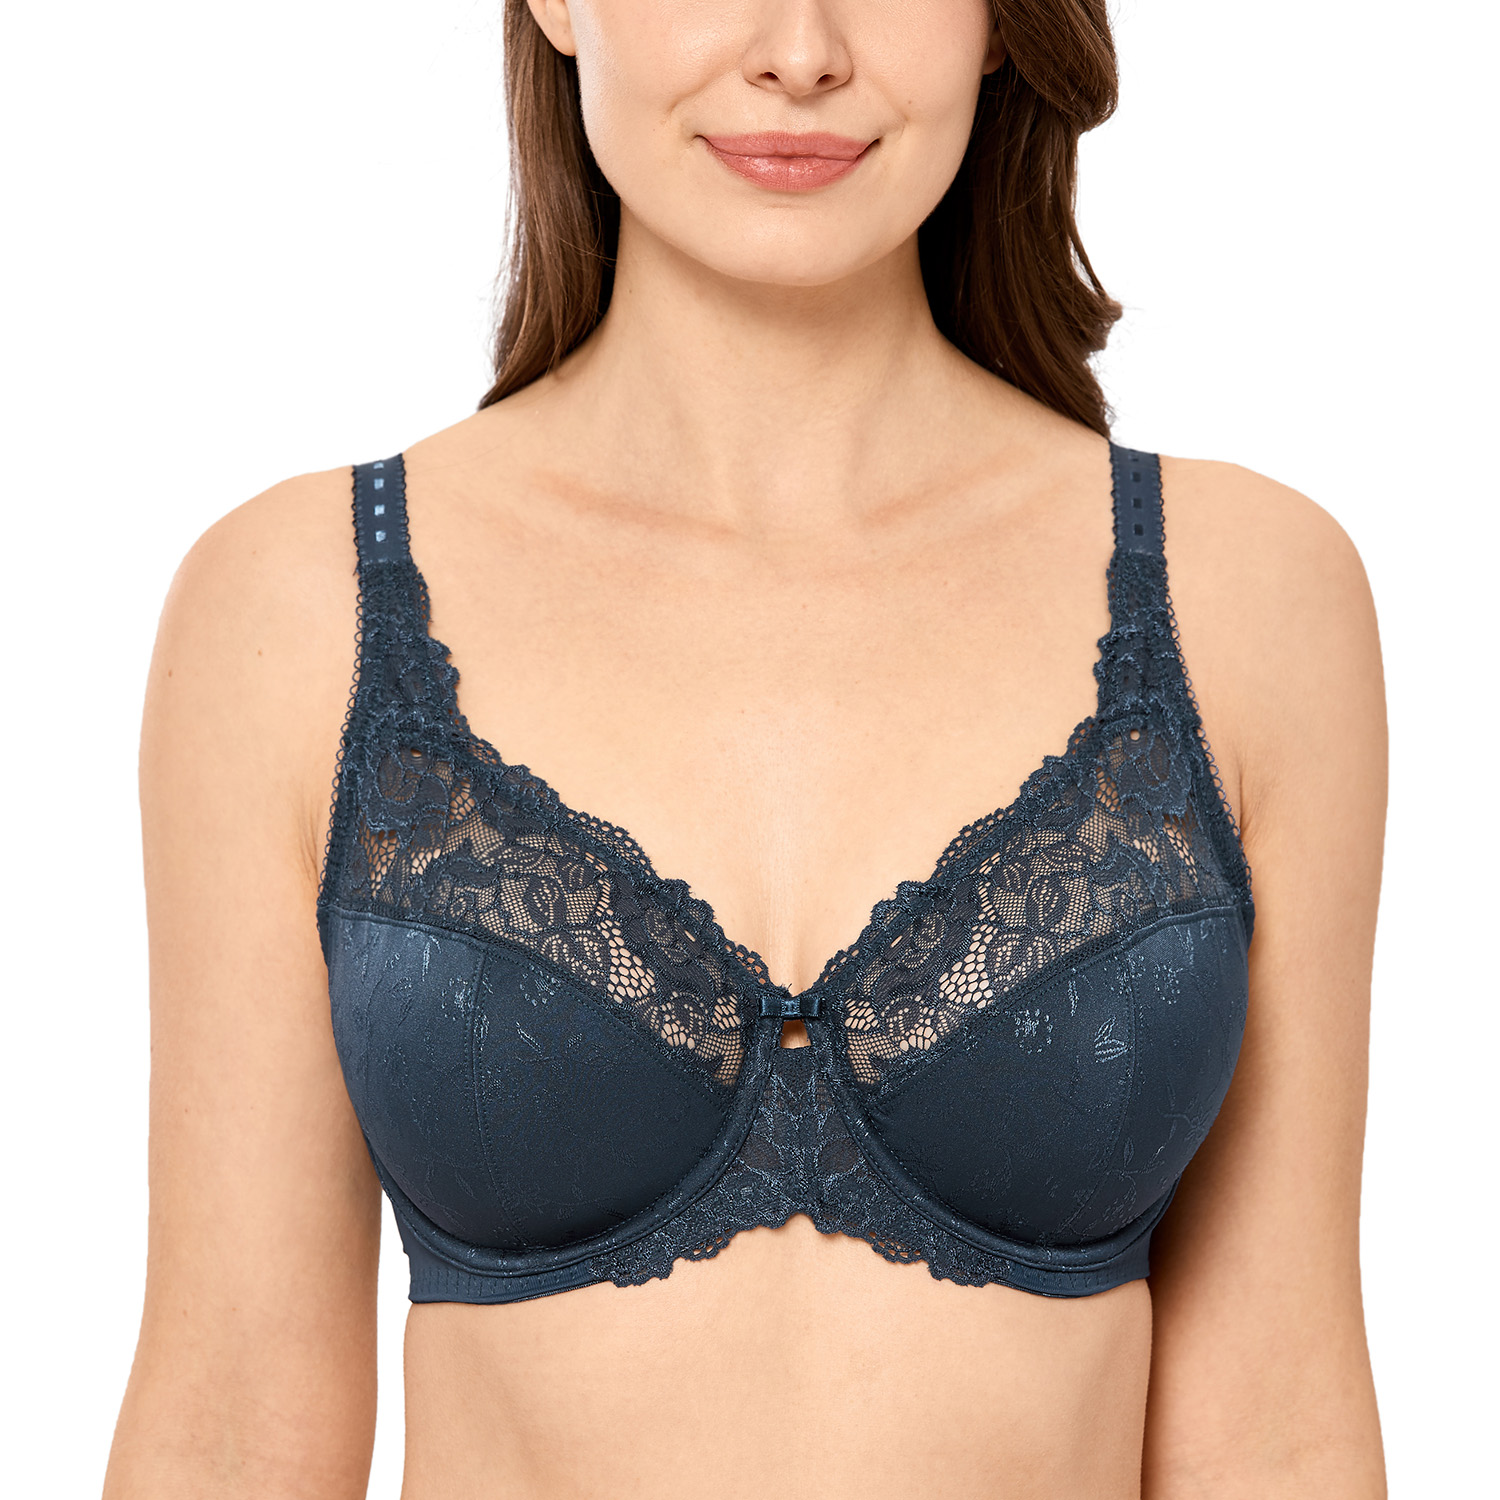 DELIMIRA Womens Non-Padded Minimizer Bra Full Coverage Smooth Underwire Plus Size